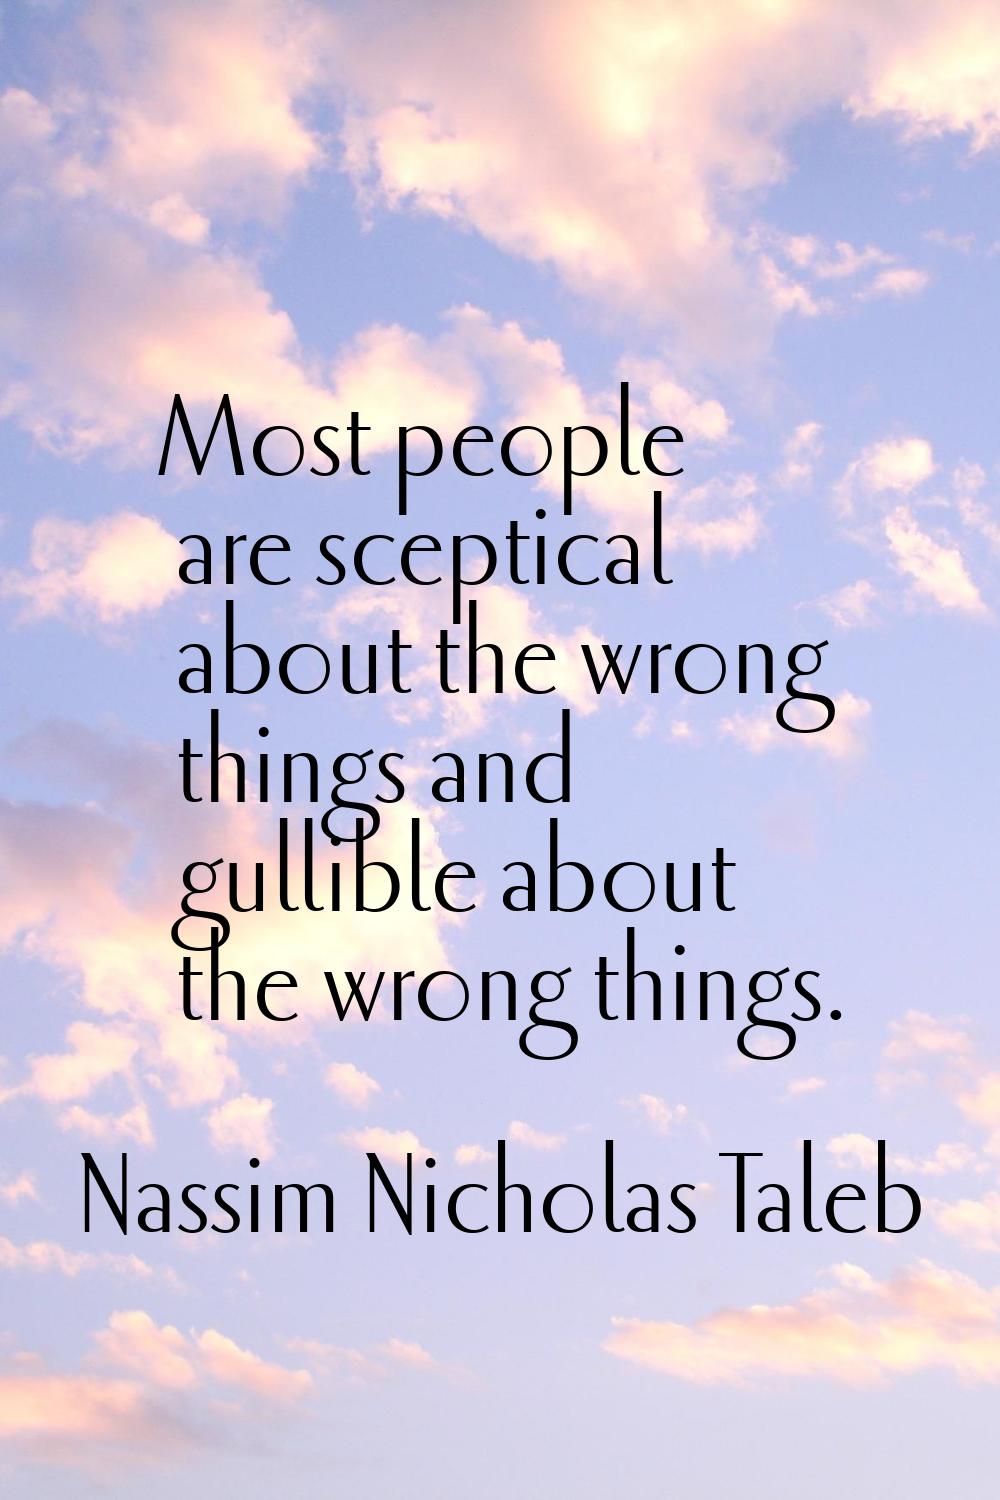 Most people are sceptical about the wrong things and gullible about the wrong things.